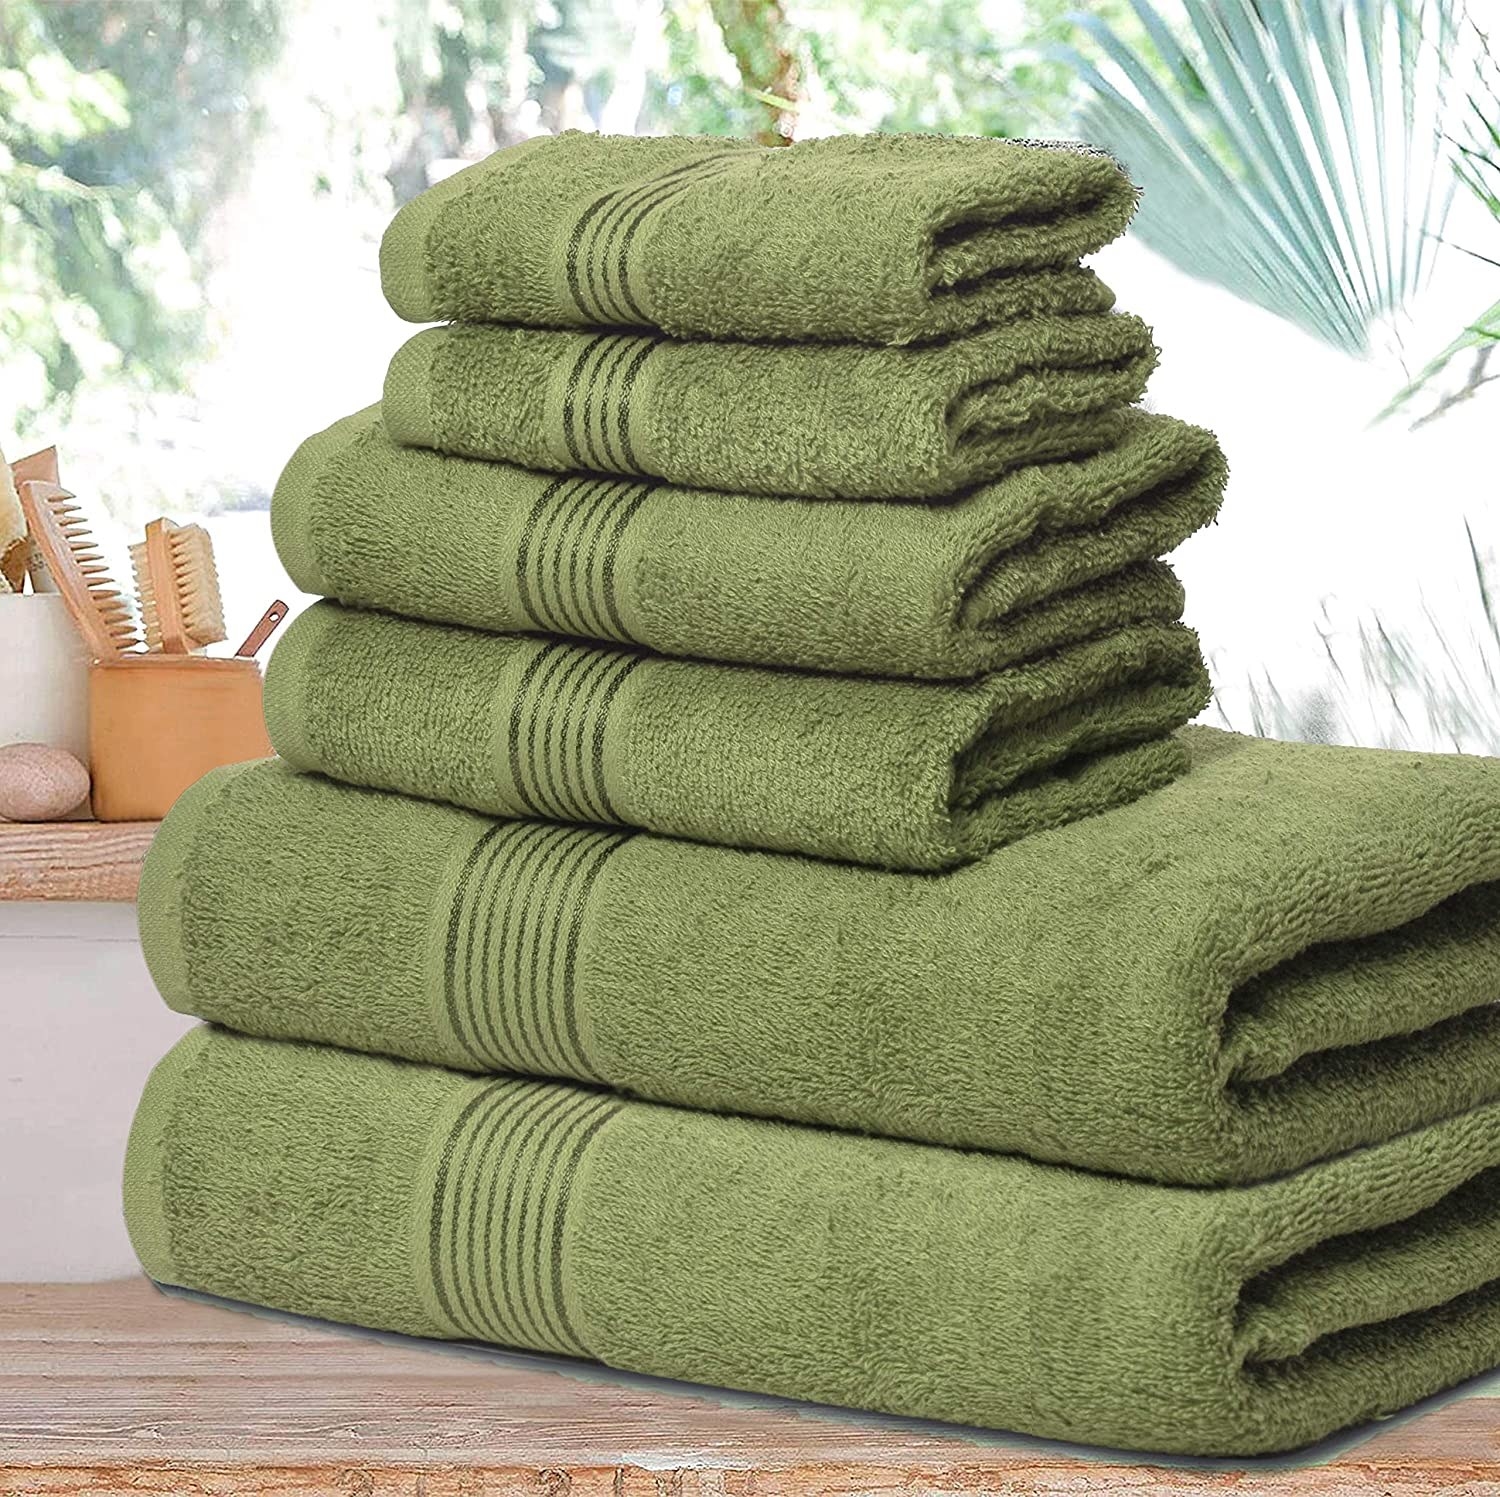 green towels stacked